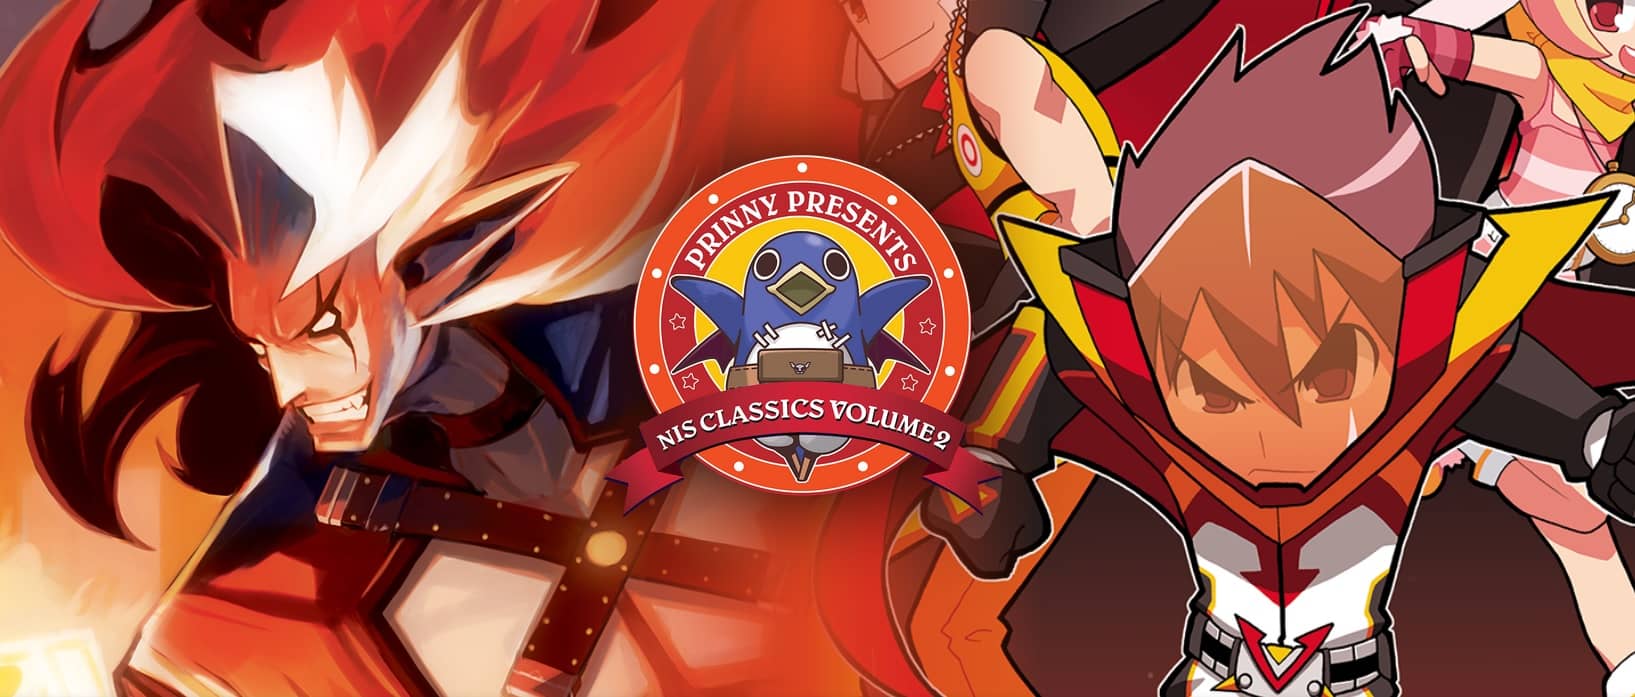 Read more about the article Prinny Presents NIS Classics Vol. 2 Makai Kingdom: Reclaimed and Rebound and ZHP: Unlosing Ranger vs. Darkdeath Evilman